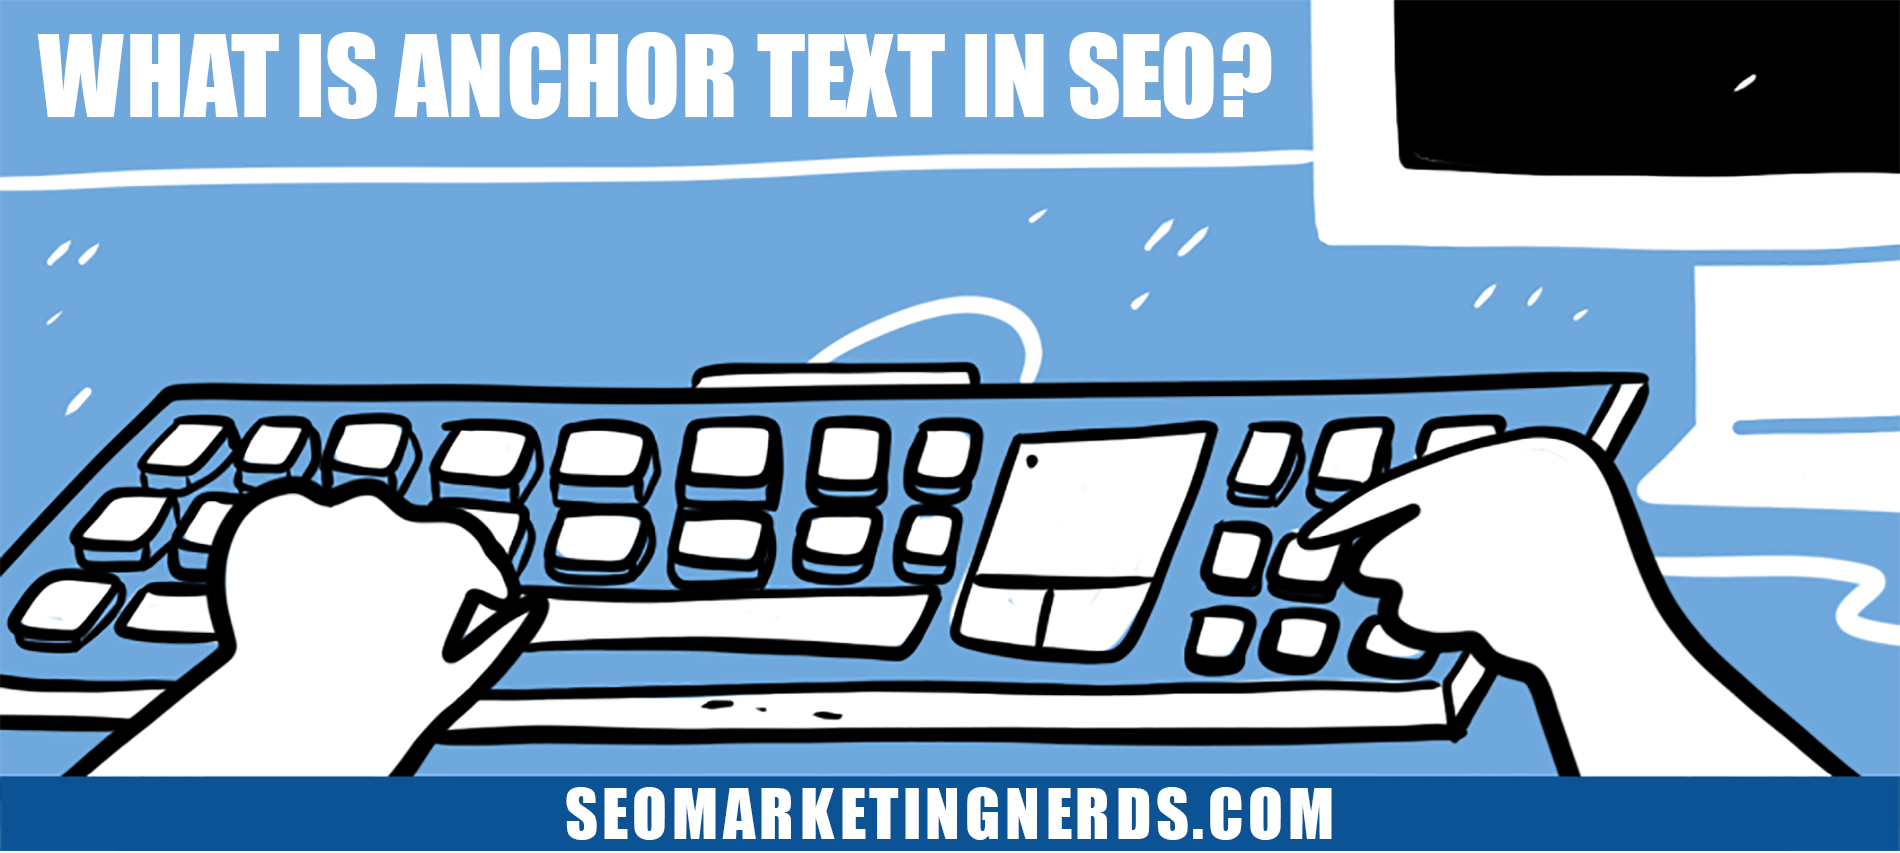 What Is Anchor Text in SEO?